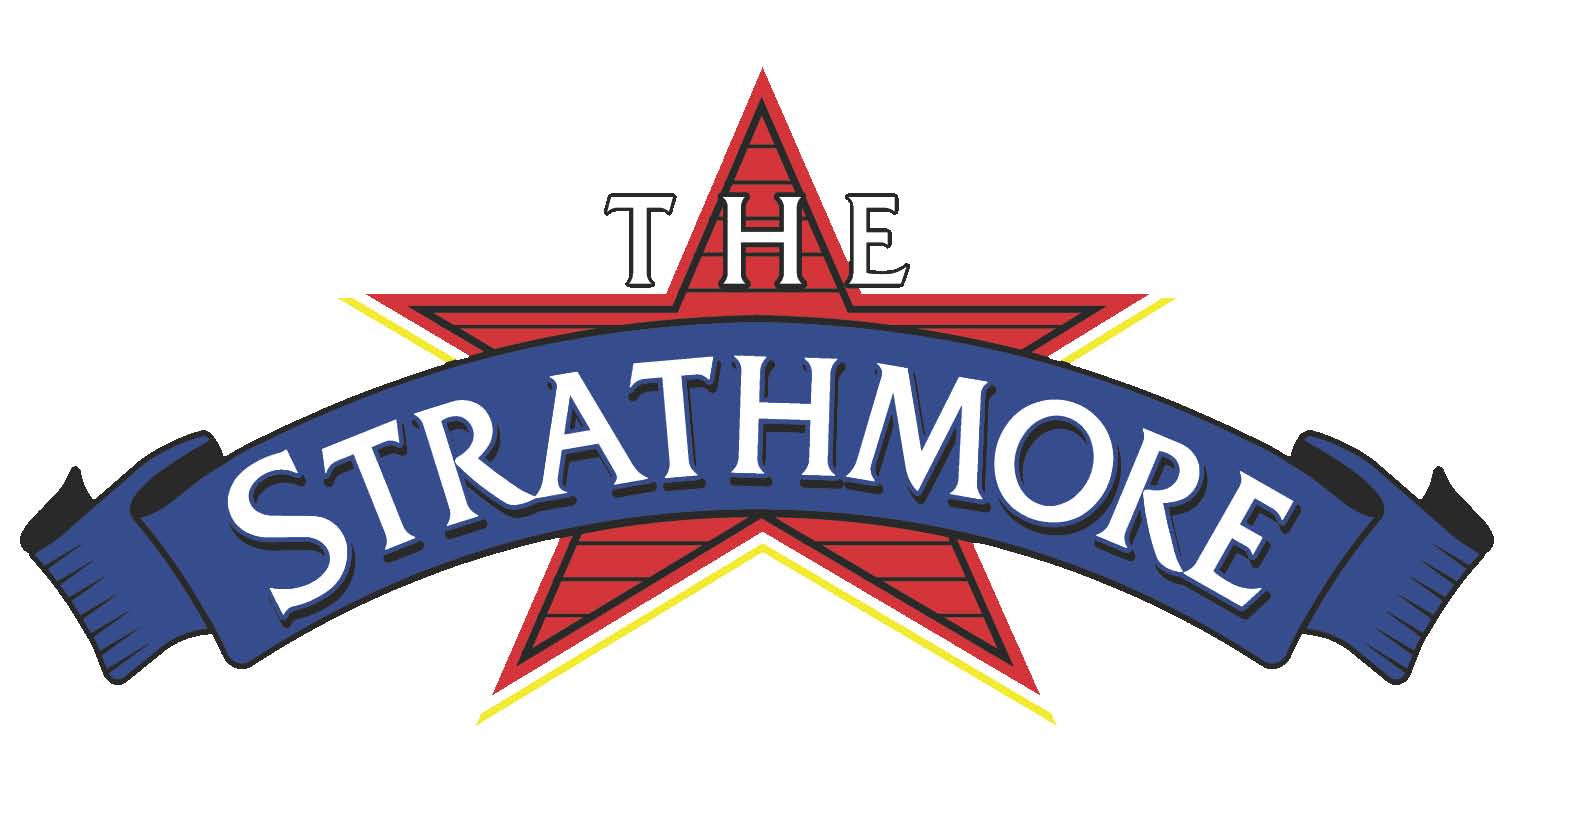 The Strathmore Hotel